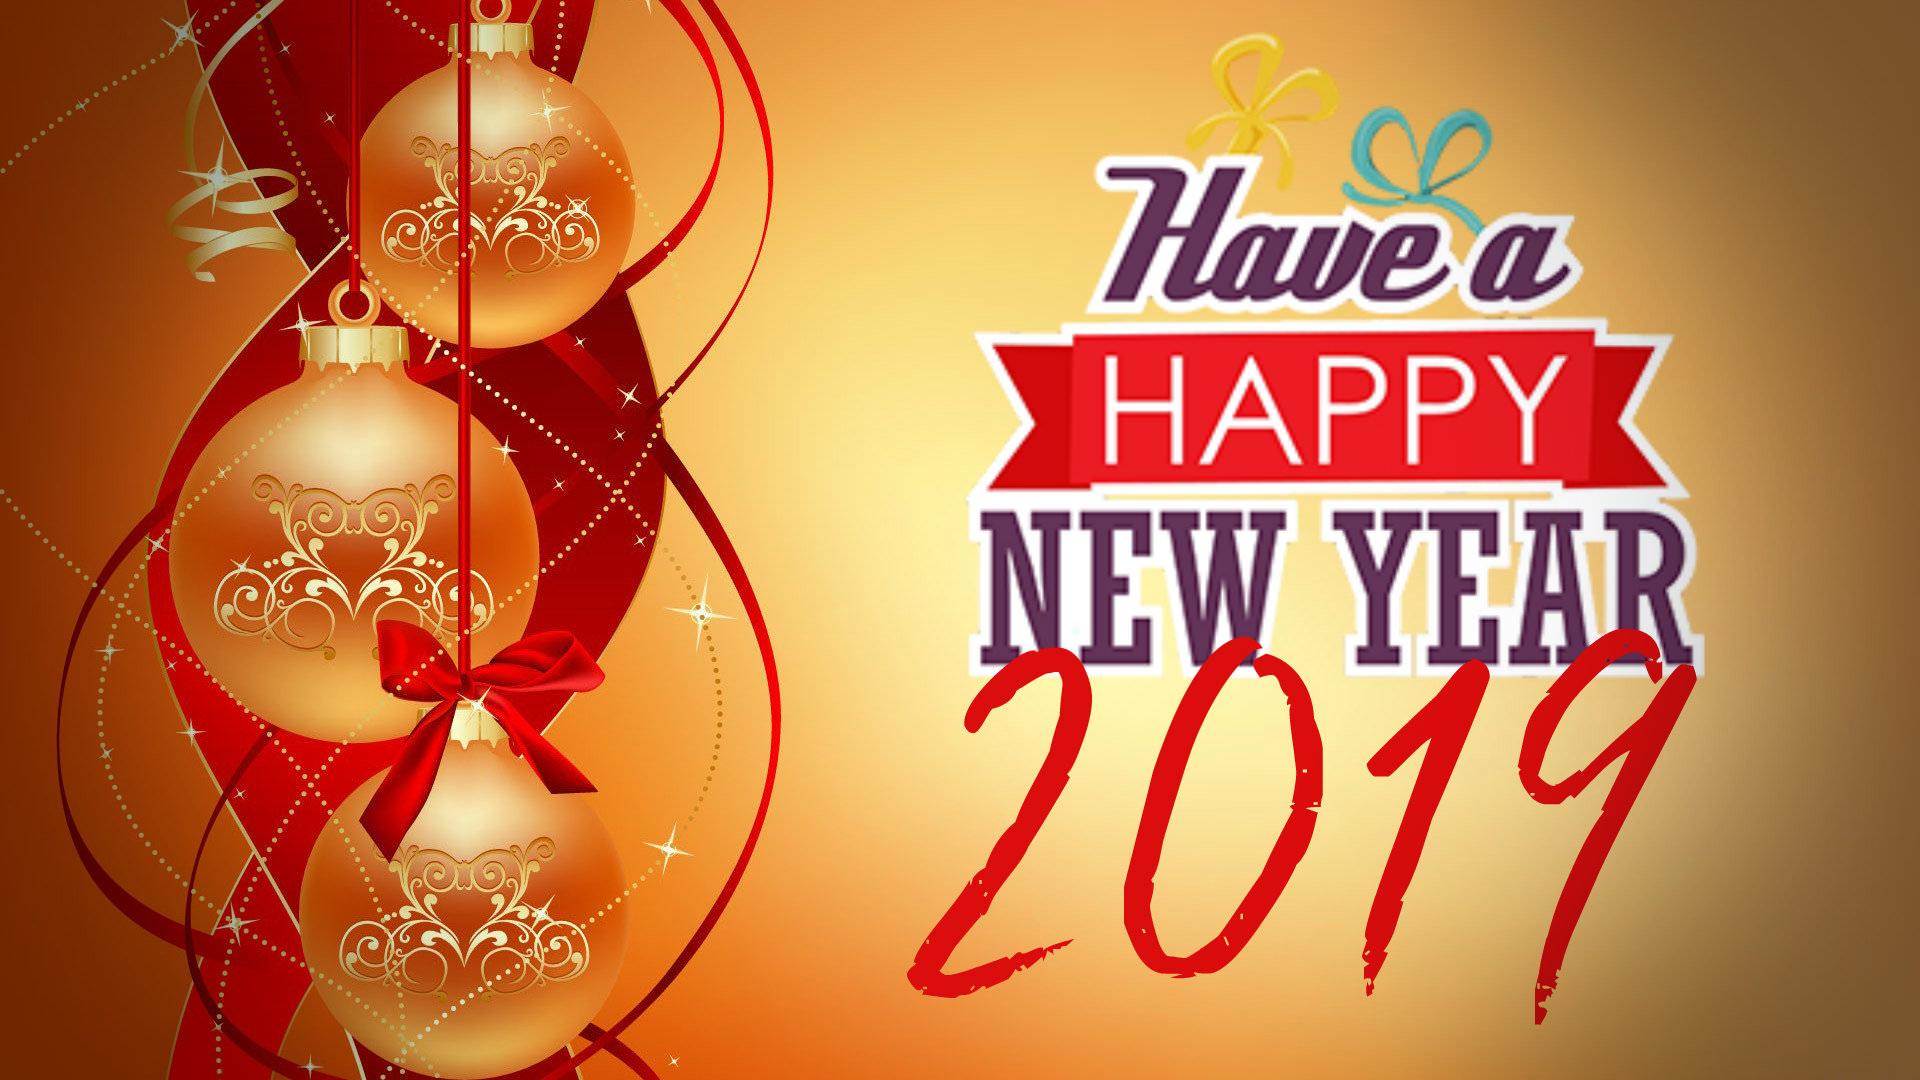 Happy New Year 2019 Wishes & Quotes